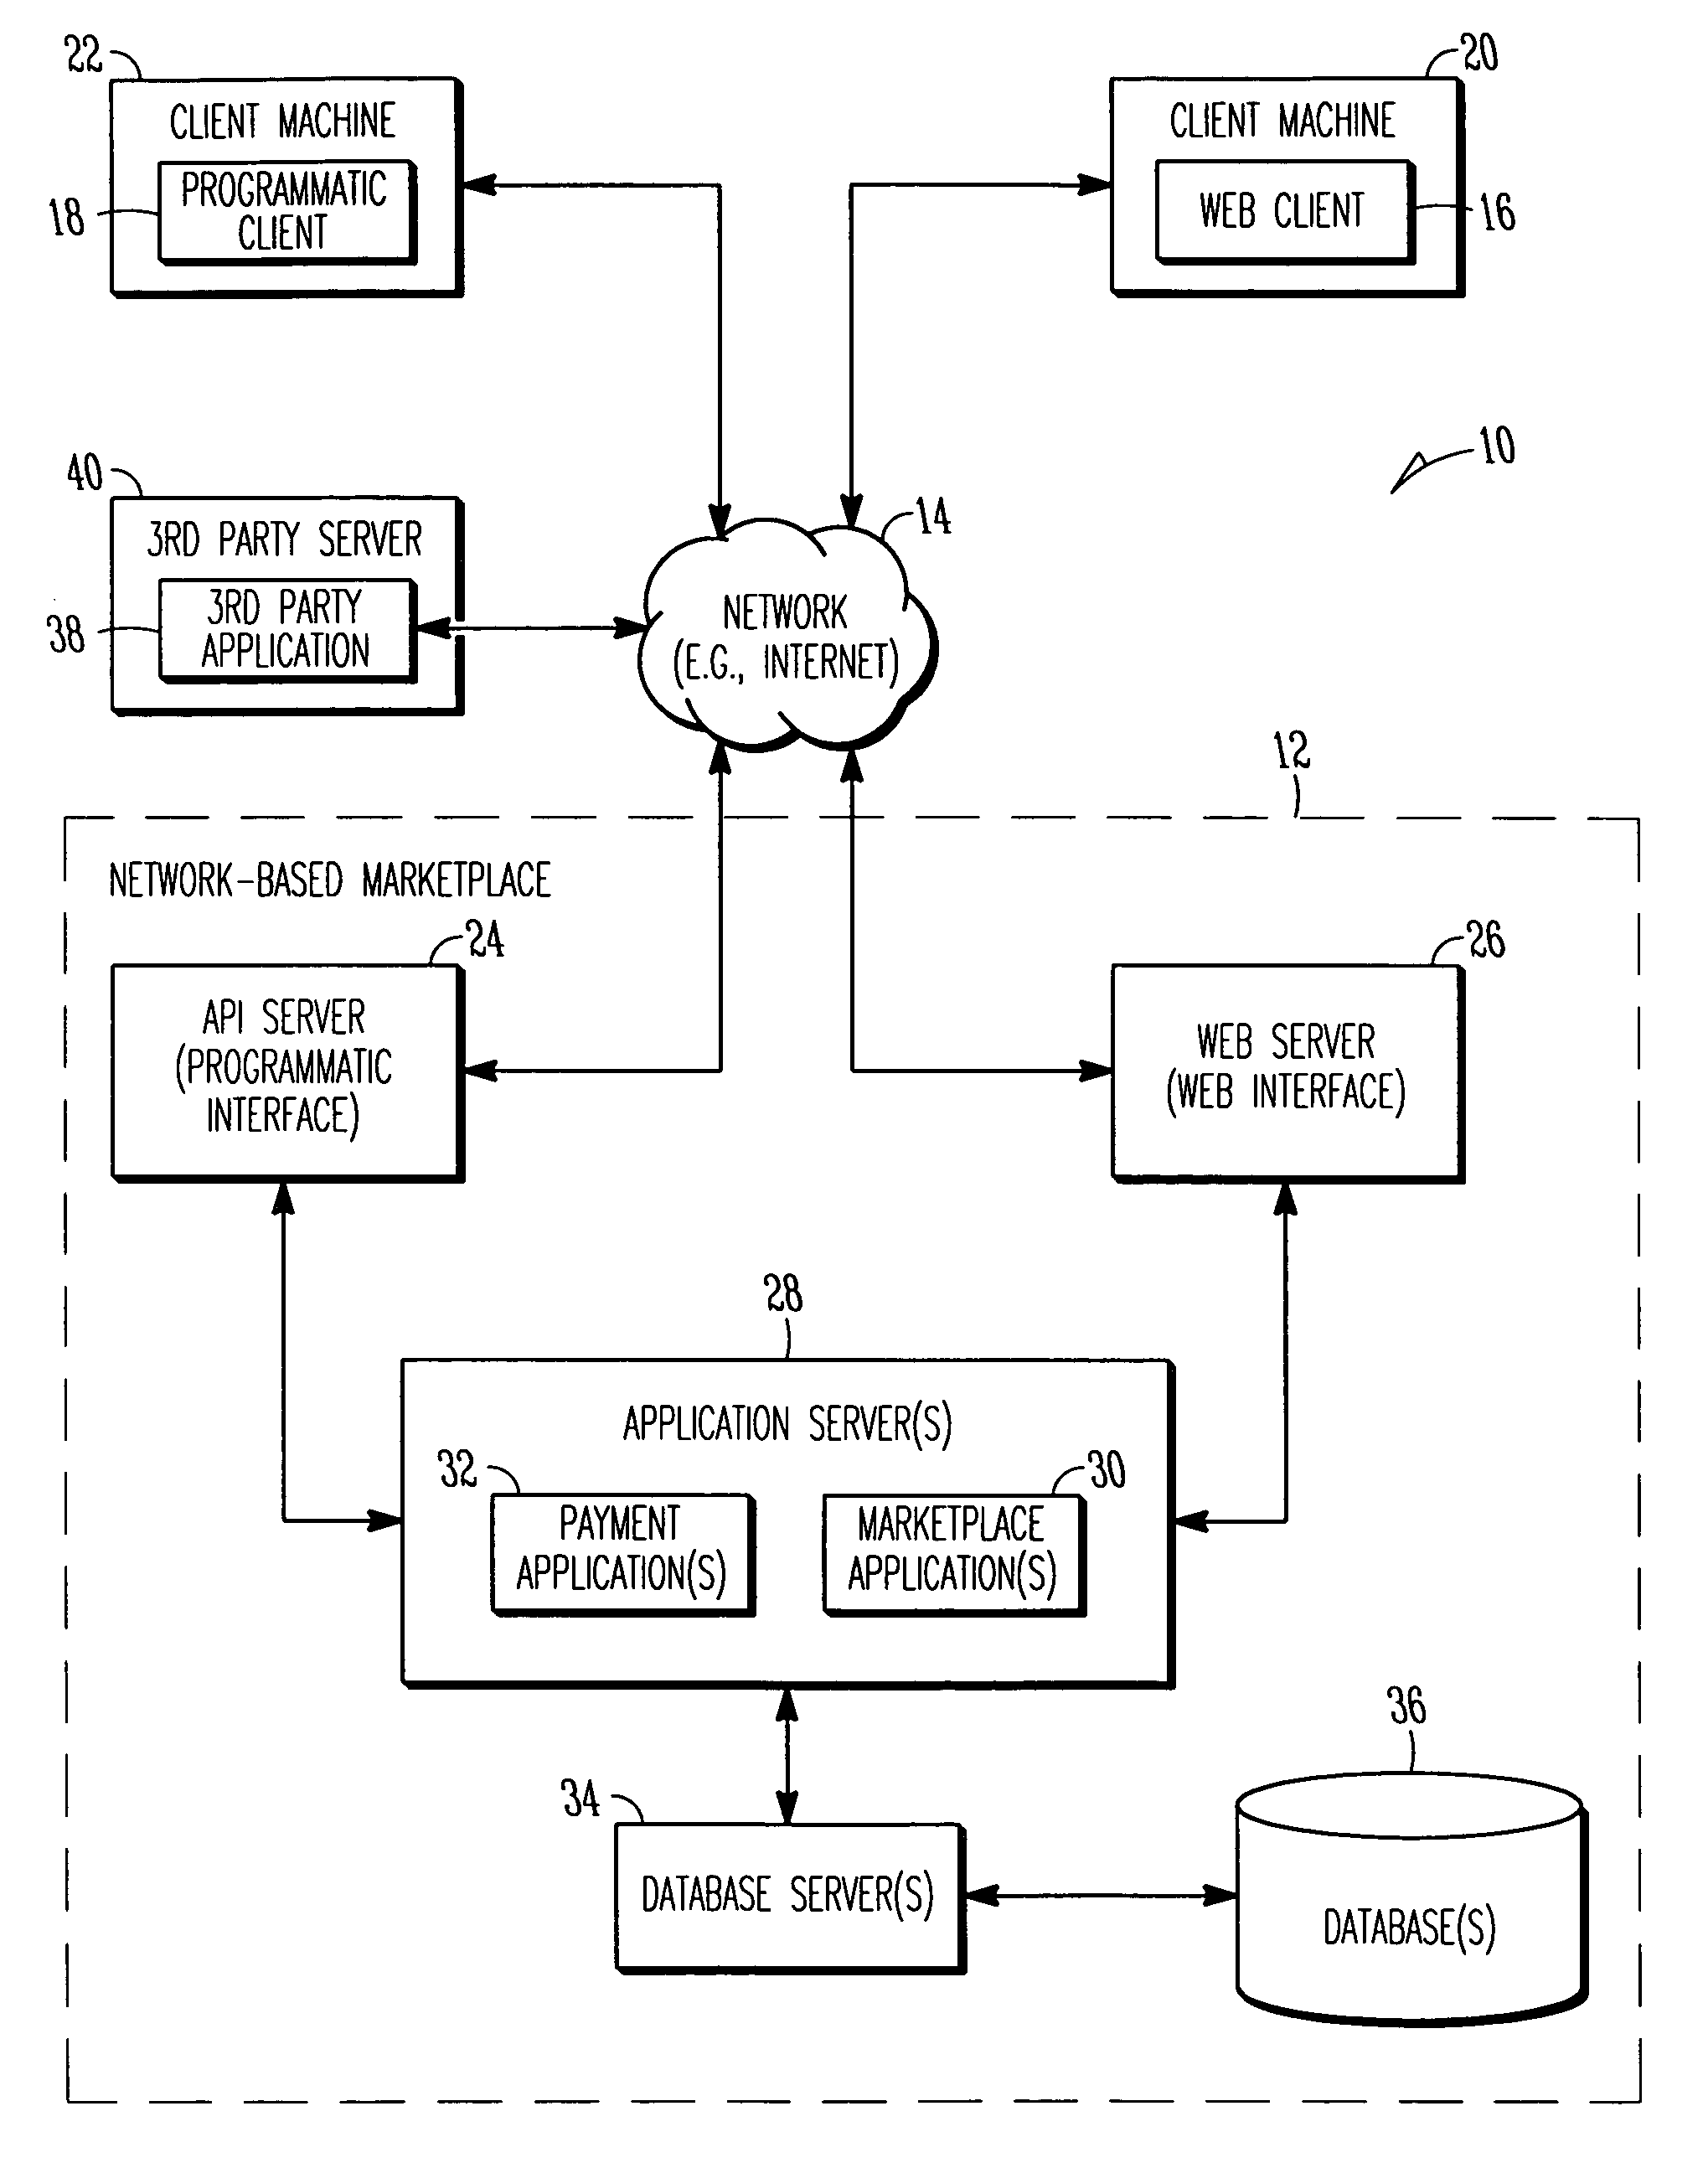 Method and system to design a dispute resolution process